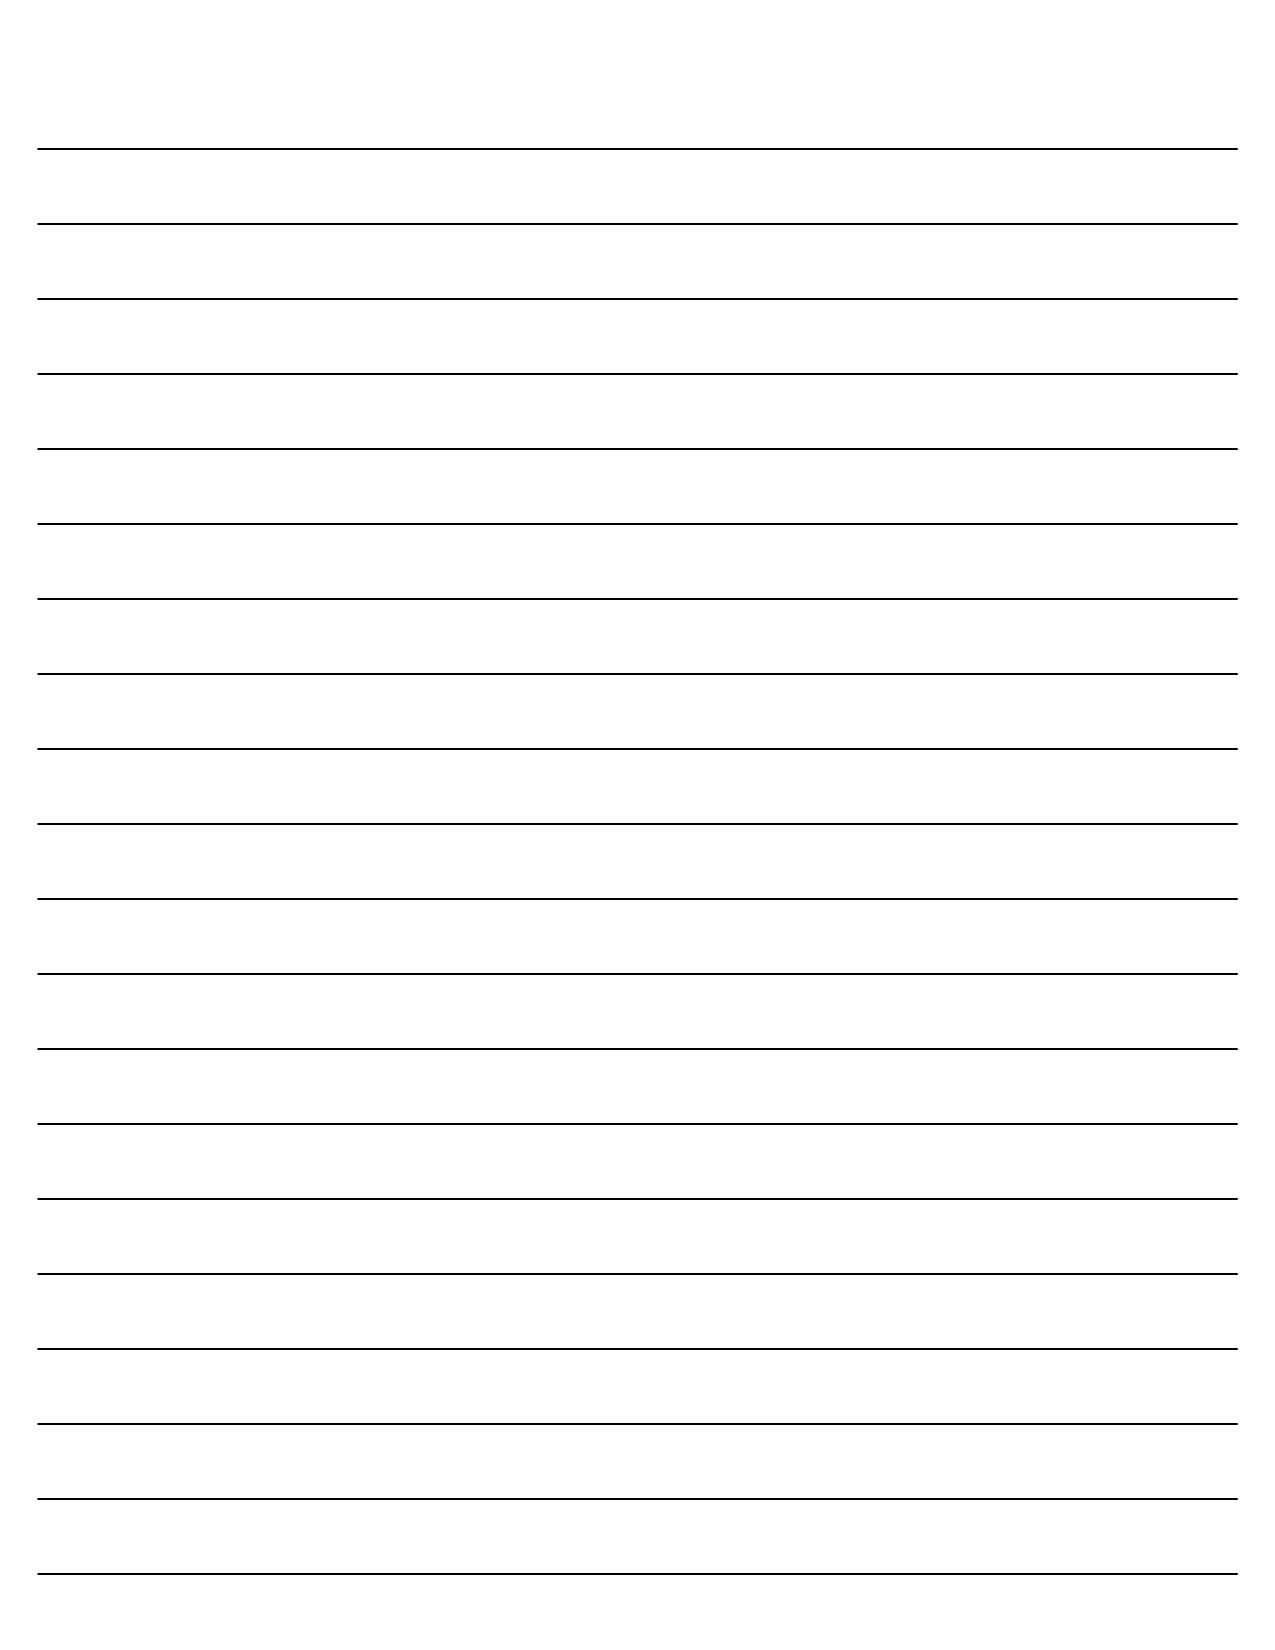 Printable Lined Writing Paper Free